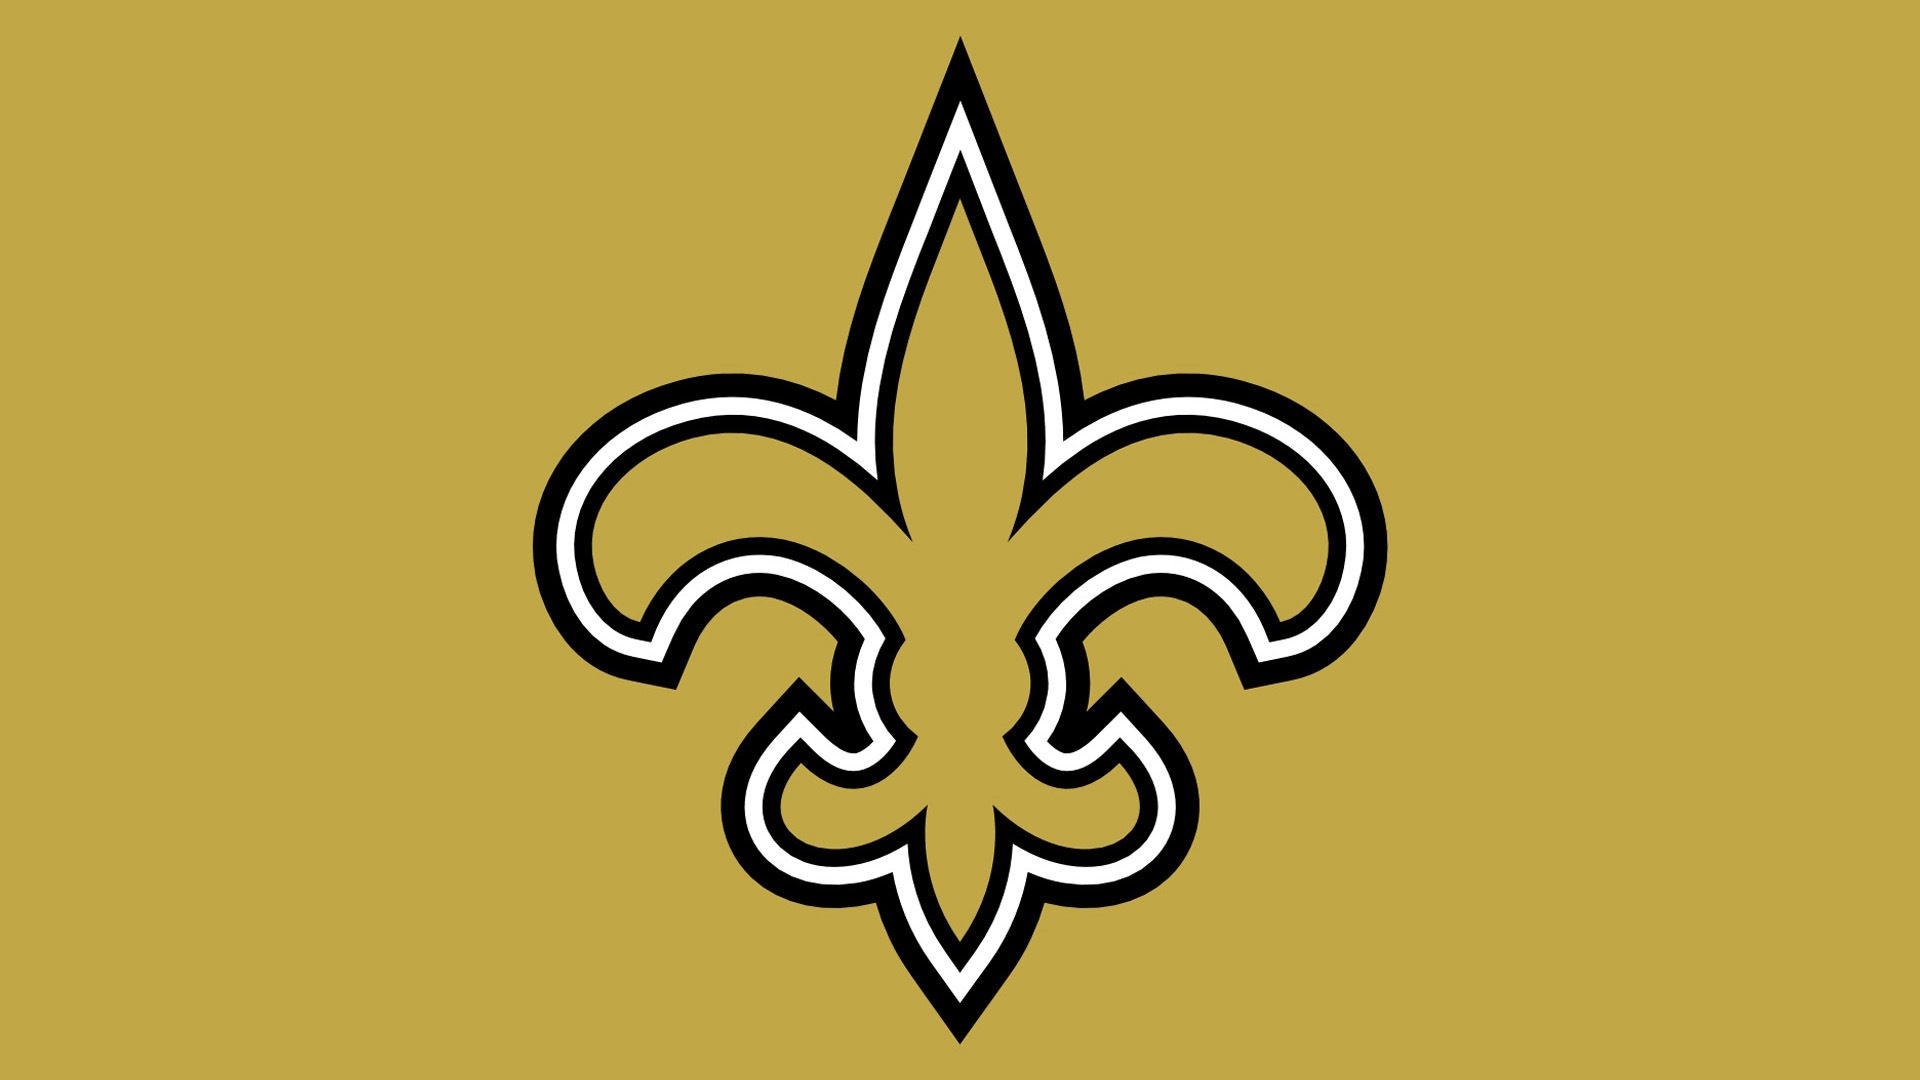 HD New Orleans Saints Backgrounds with resolution 1920x1080 pixel. You can make this wallpaper for your Mac or Windows Desktop Background, iPhone, Android or Tablet and another Smartphone device